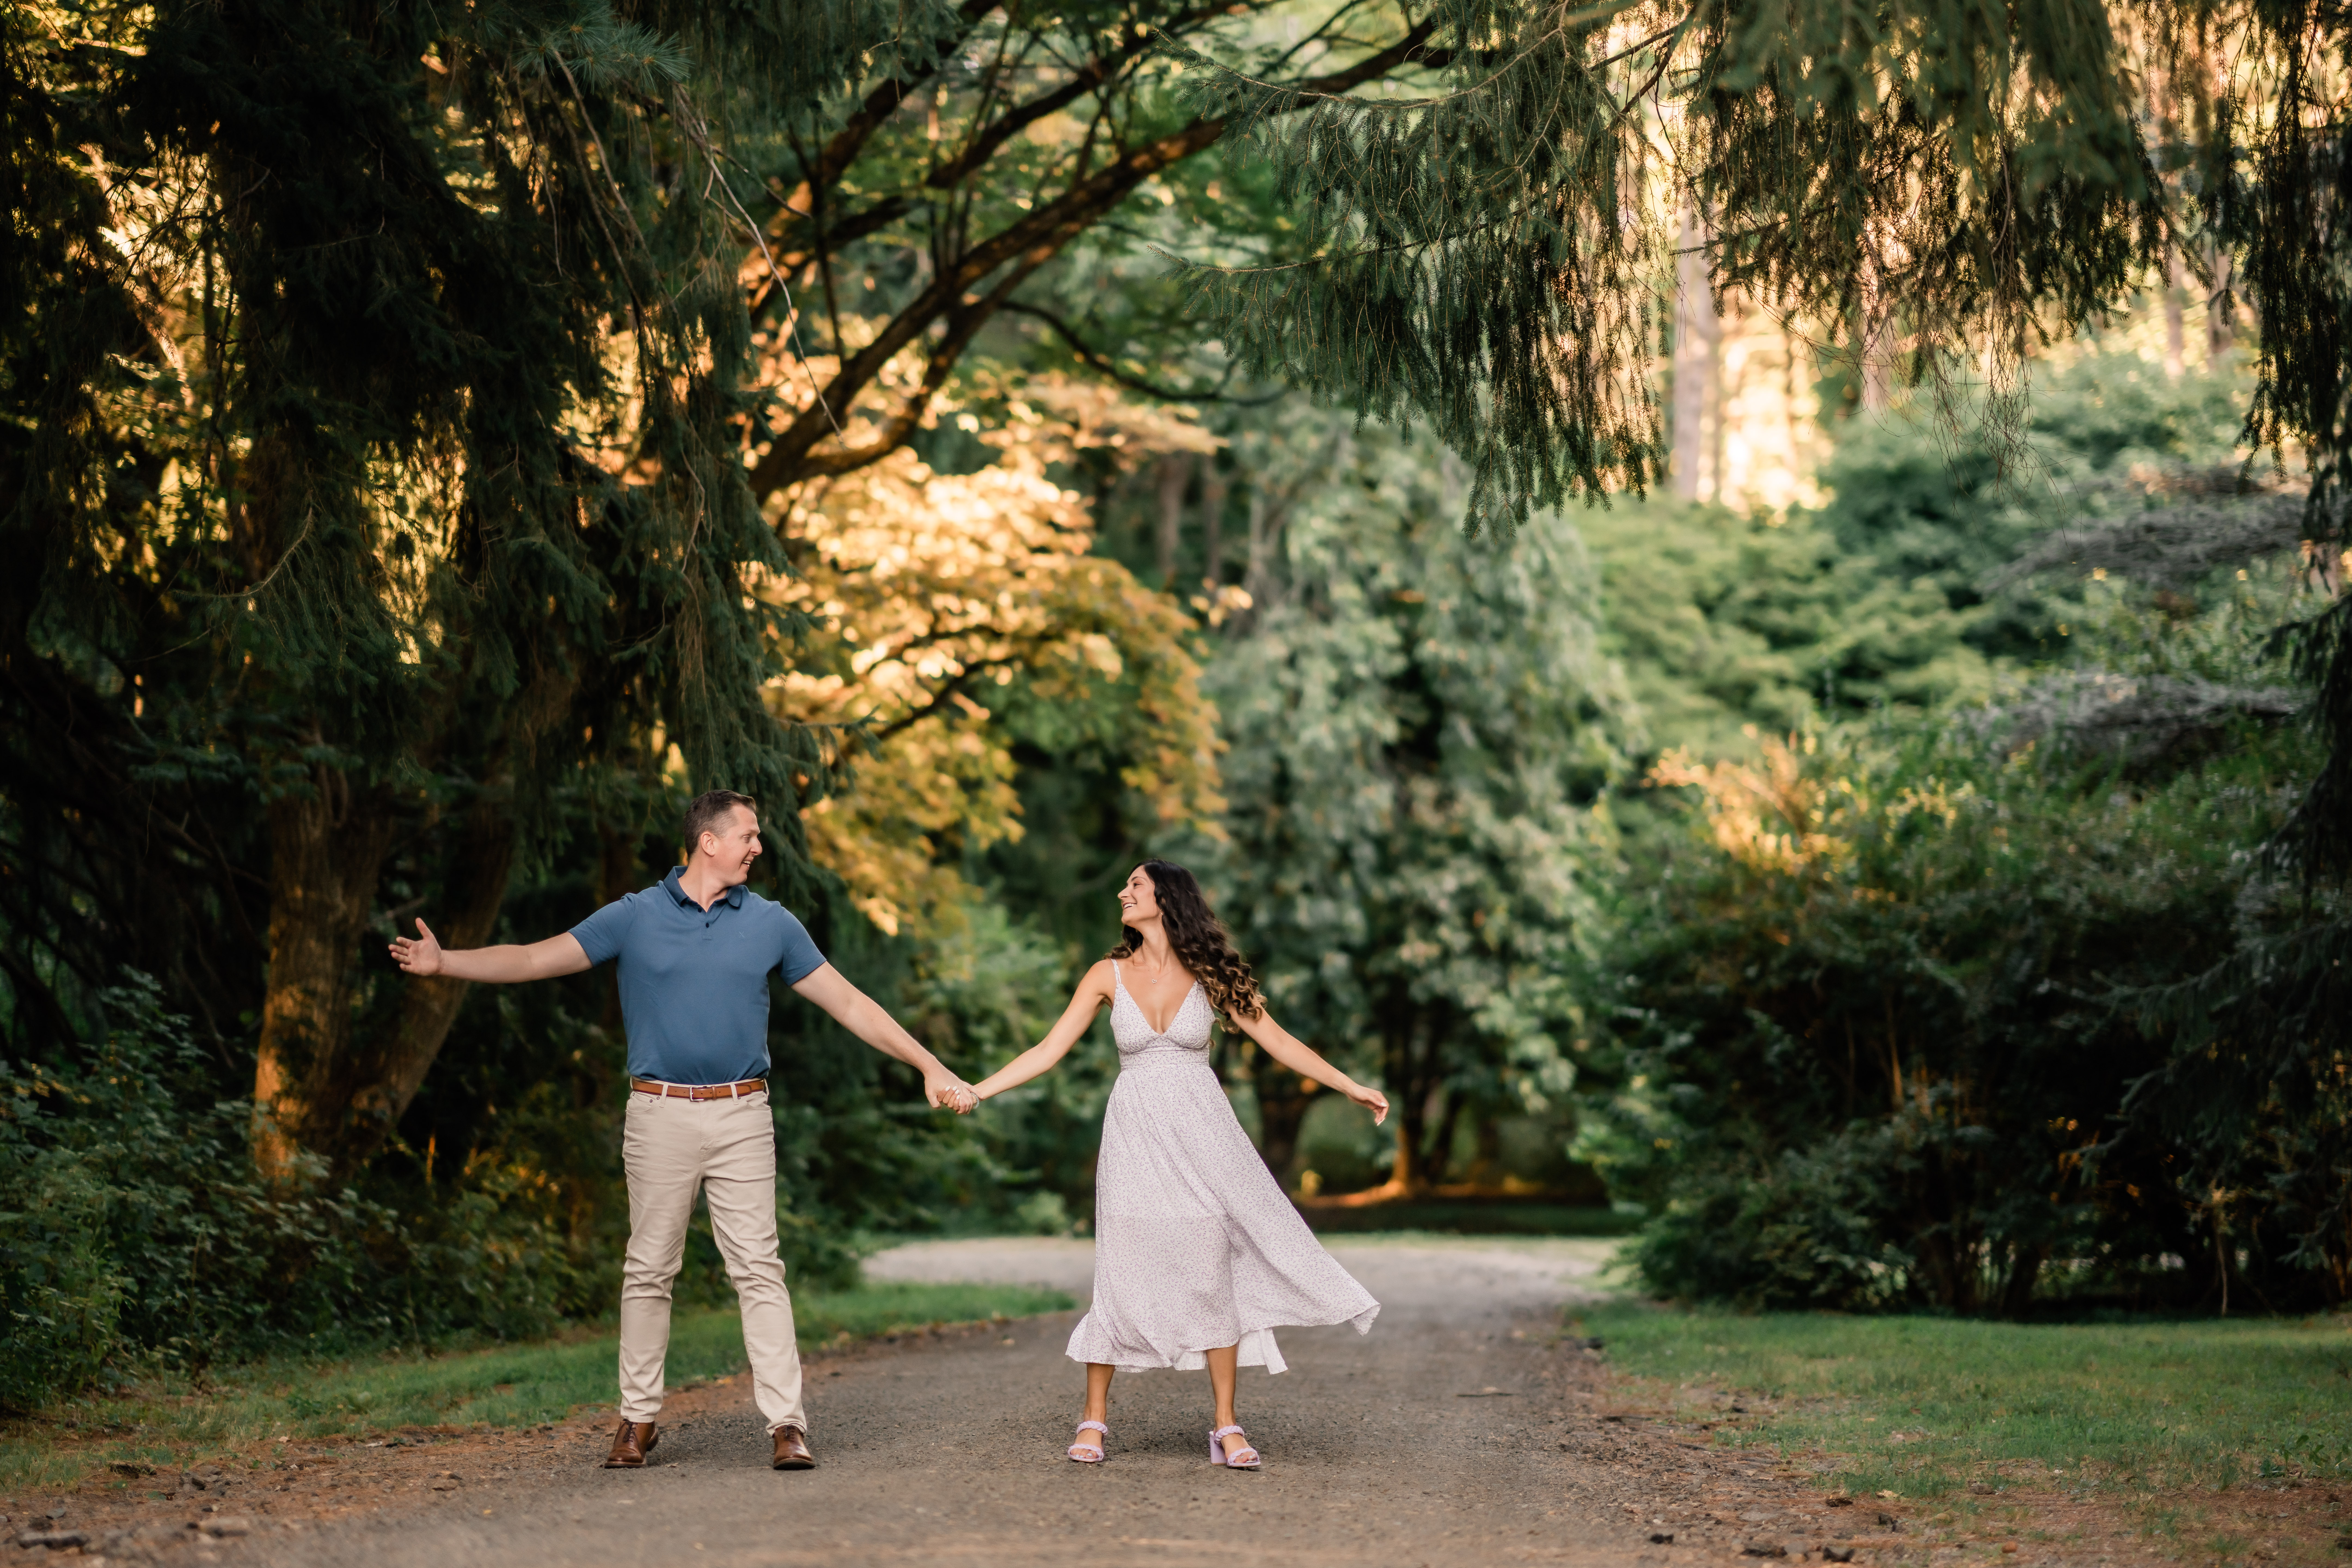 Cross Estate Gardens Engagement, Cross Estate Gardens Engagement Photographer, Bernardsville NJ Photographer, NJ Engagement Photographer, couple smiling at each other holding their arms out dancing while surrounded by green trees and bushes